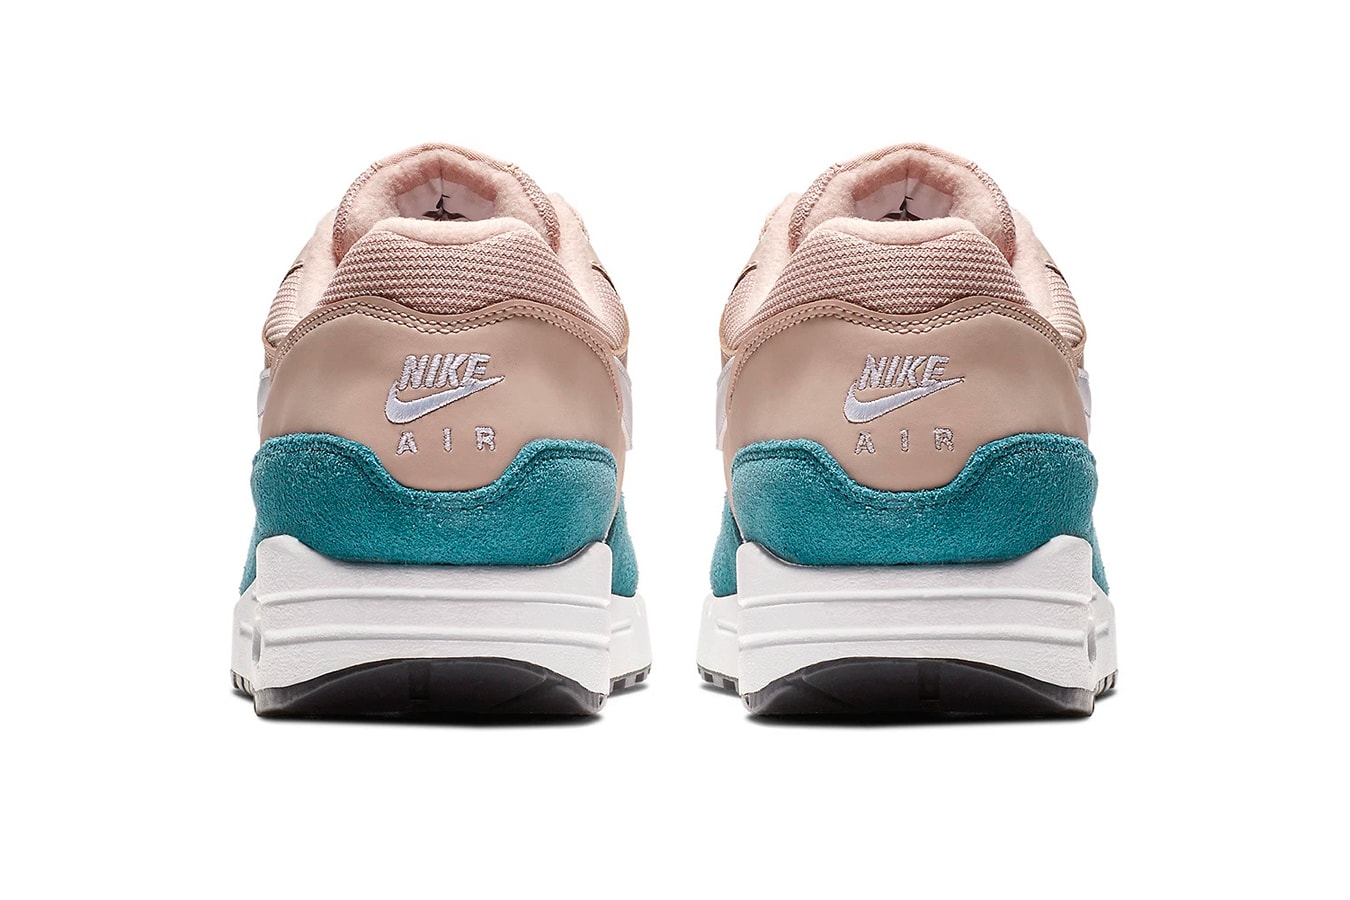 Nike Air Max 1 "Atomic Teal" Release Date For Sale Information